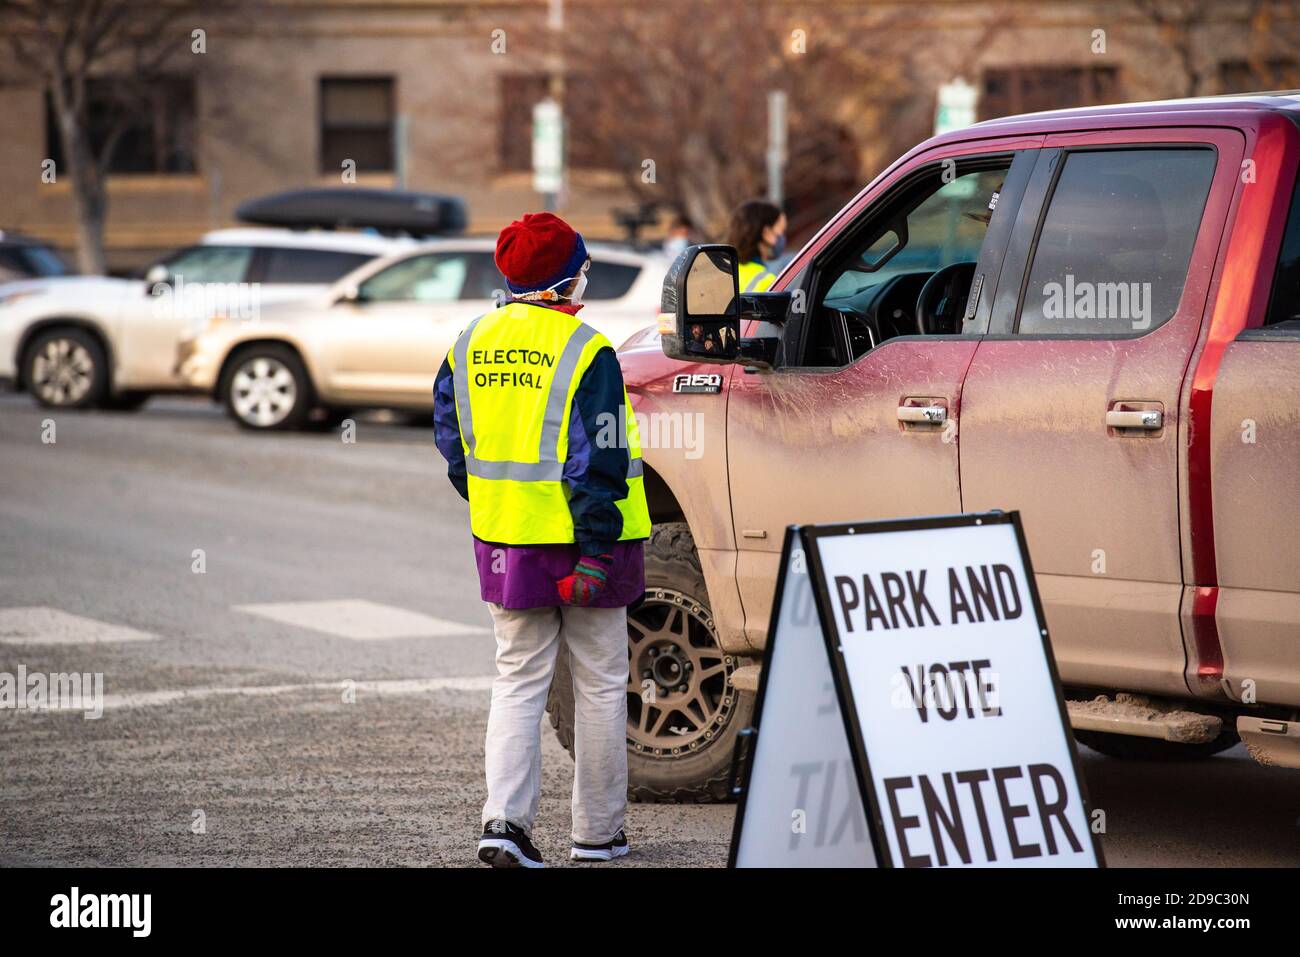 Helena, Montana / November 3, 2020: Woman poll worker helping voter at polling station, park vote in truck, presidential Election Day voting, people i Stock Photo